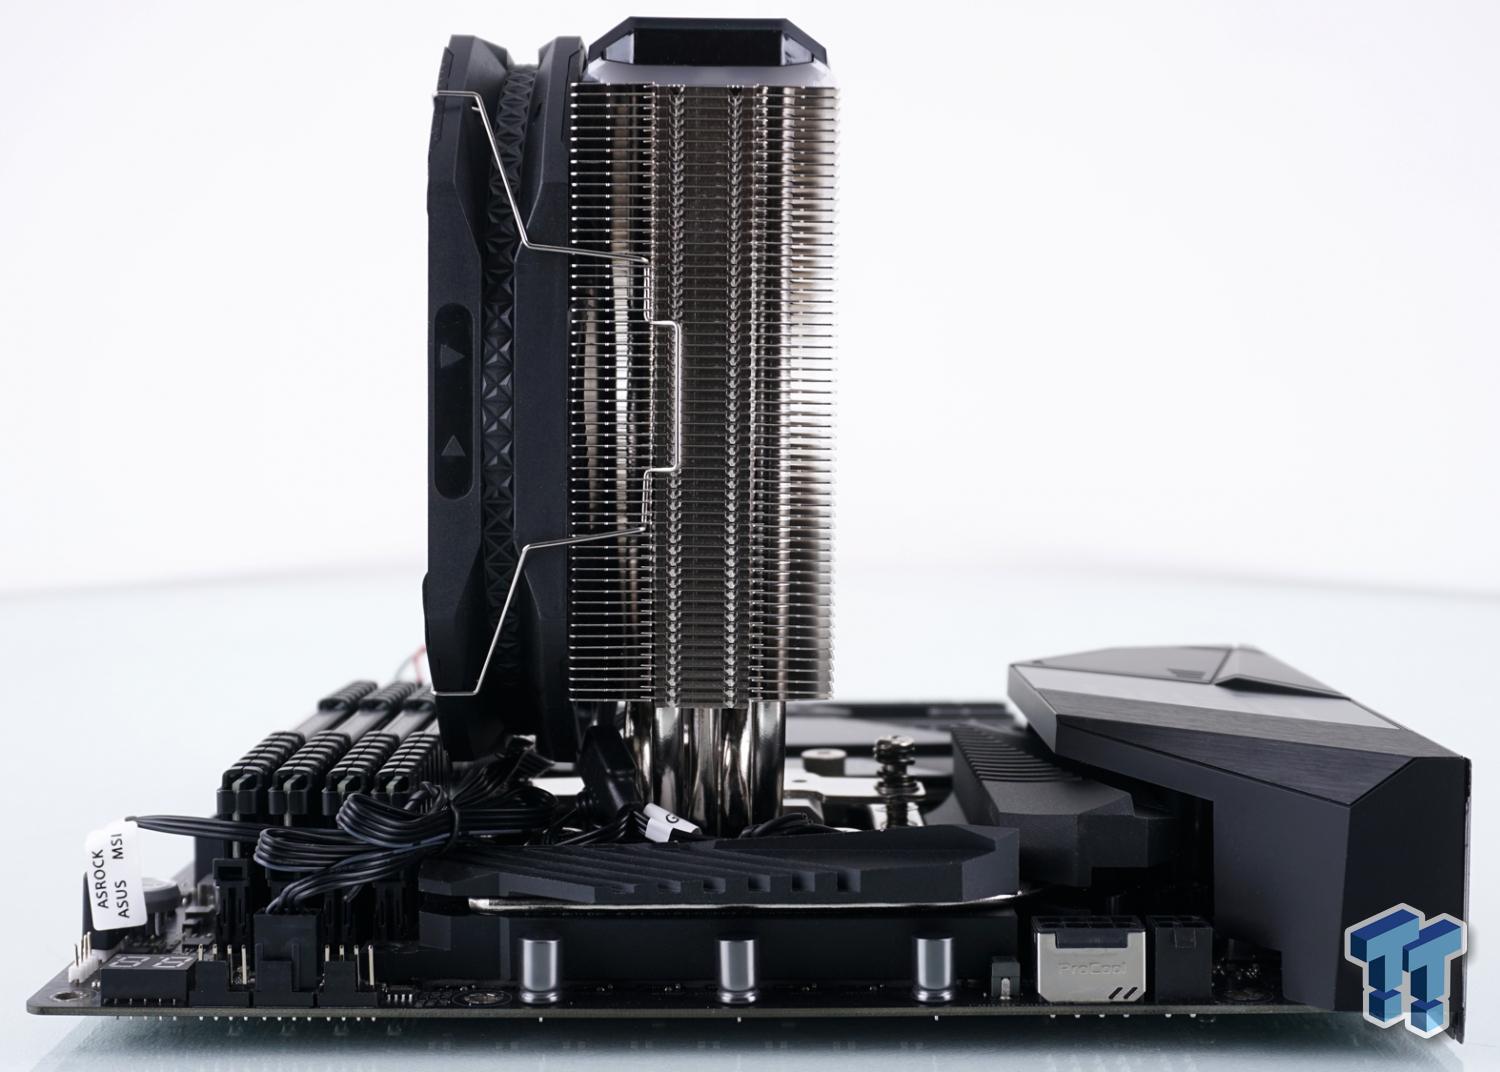 Deepcool AS500 Review: Silent Sophistication